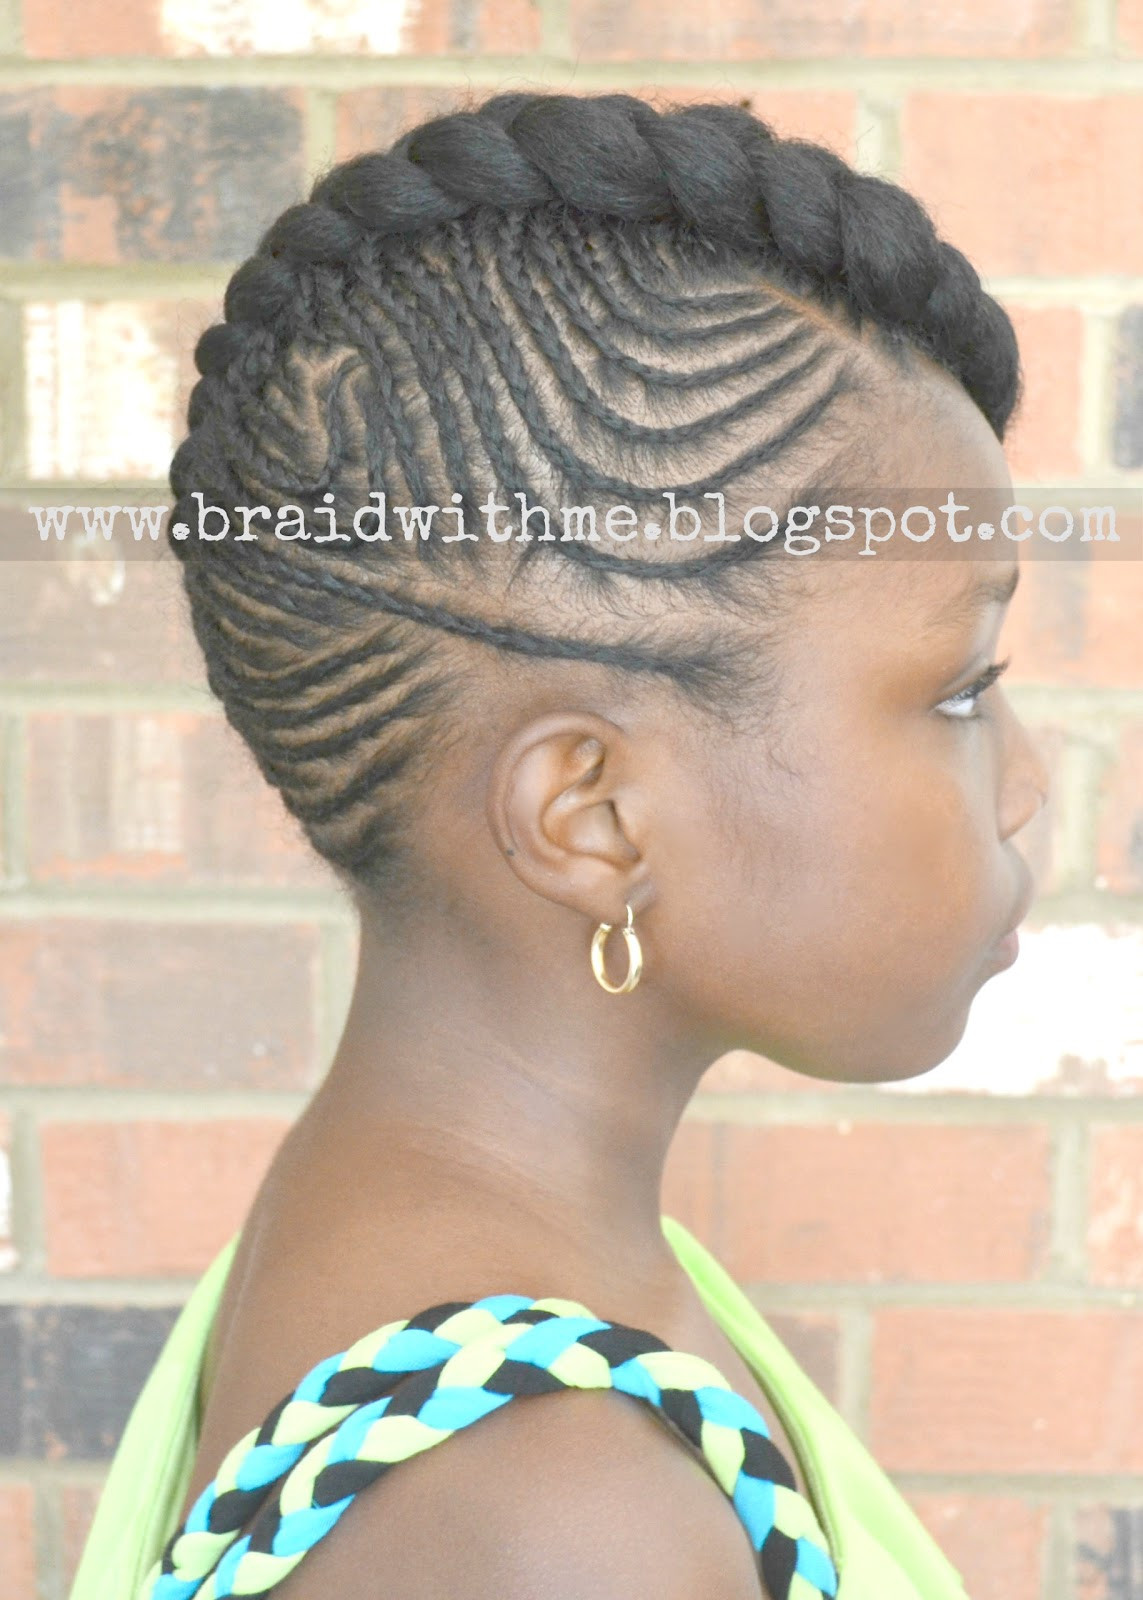 Pictures Of Updo Cornrow Hairstyles
 Braid with Me Intricate Cornrow Updo on Natural Hair